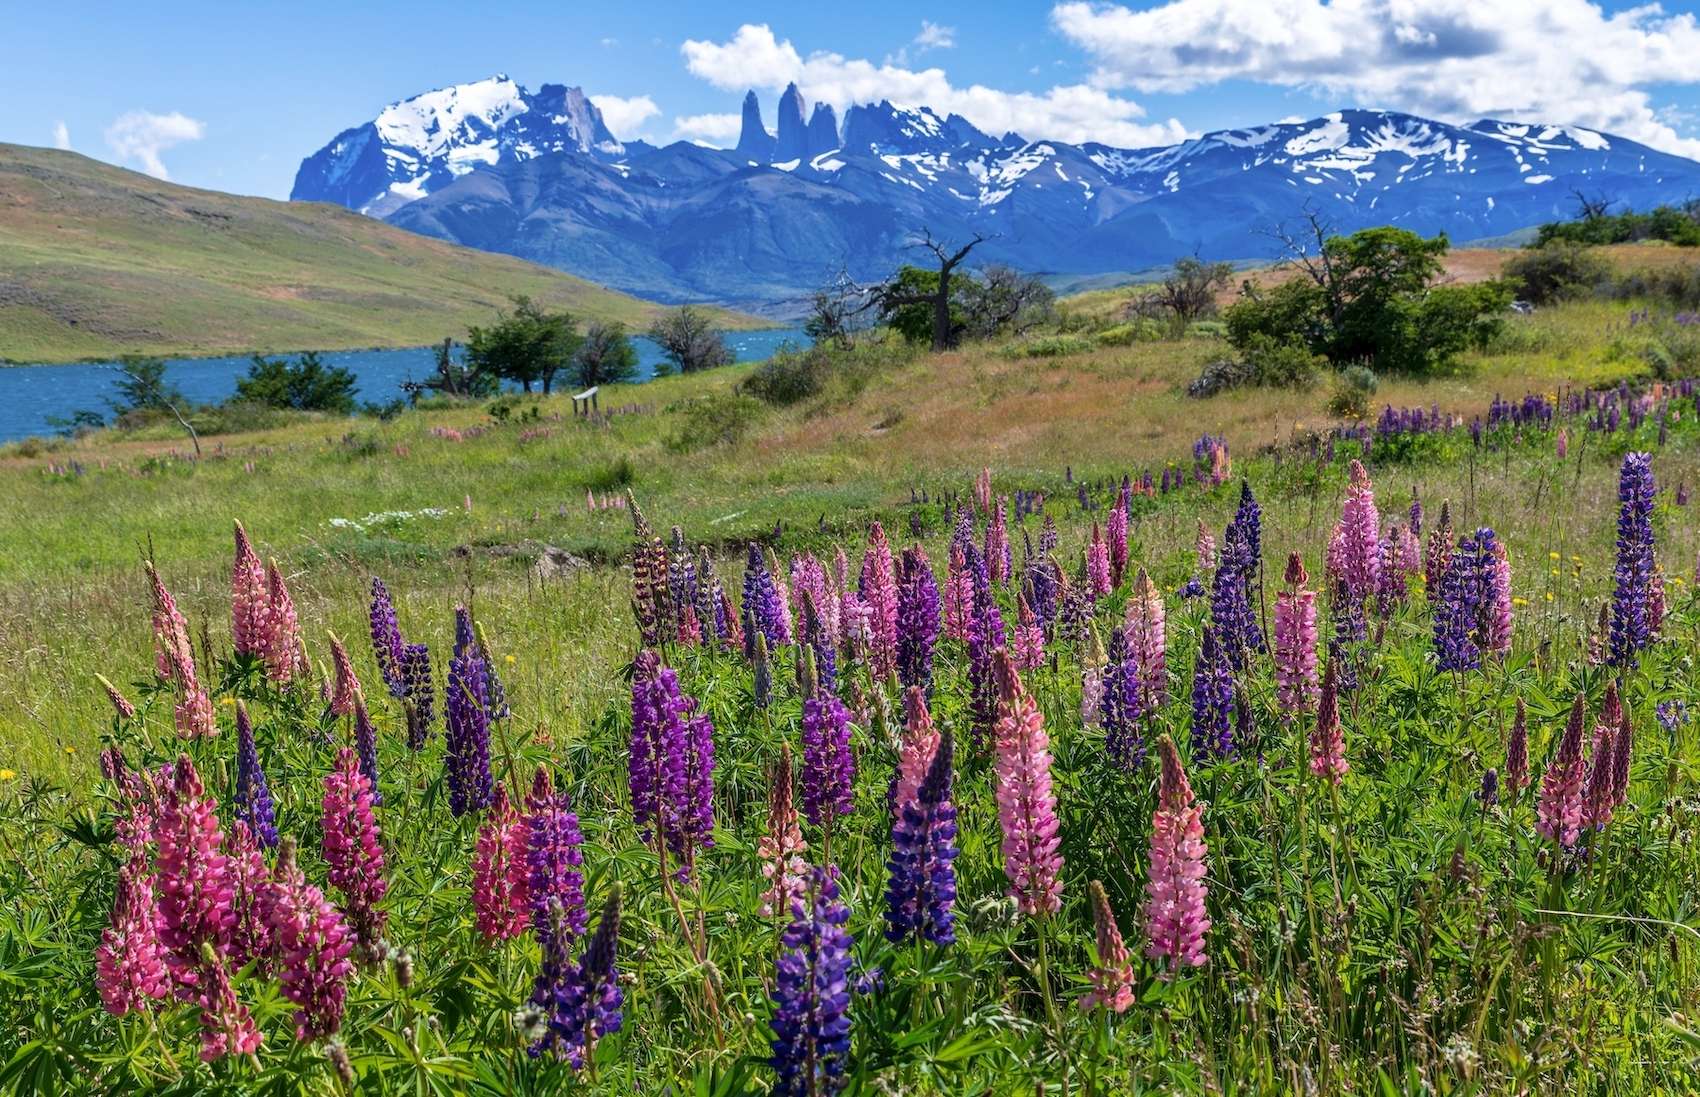 Wild lupine flowers with Torres del ¨Paine national park in background, Patagonia, Chile